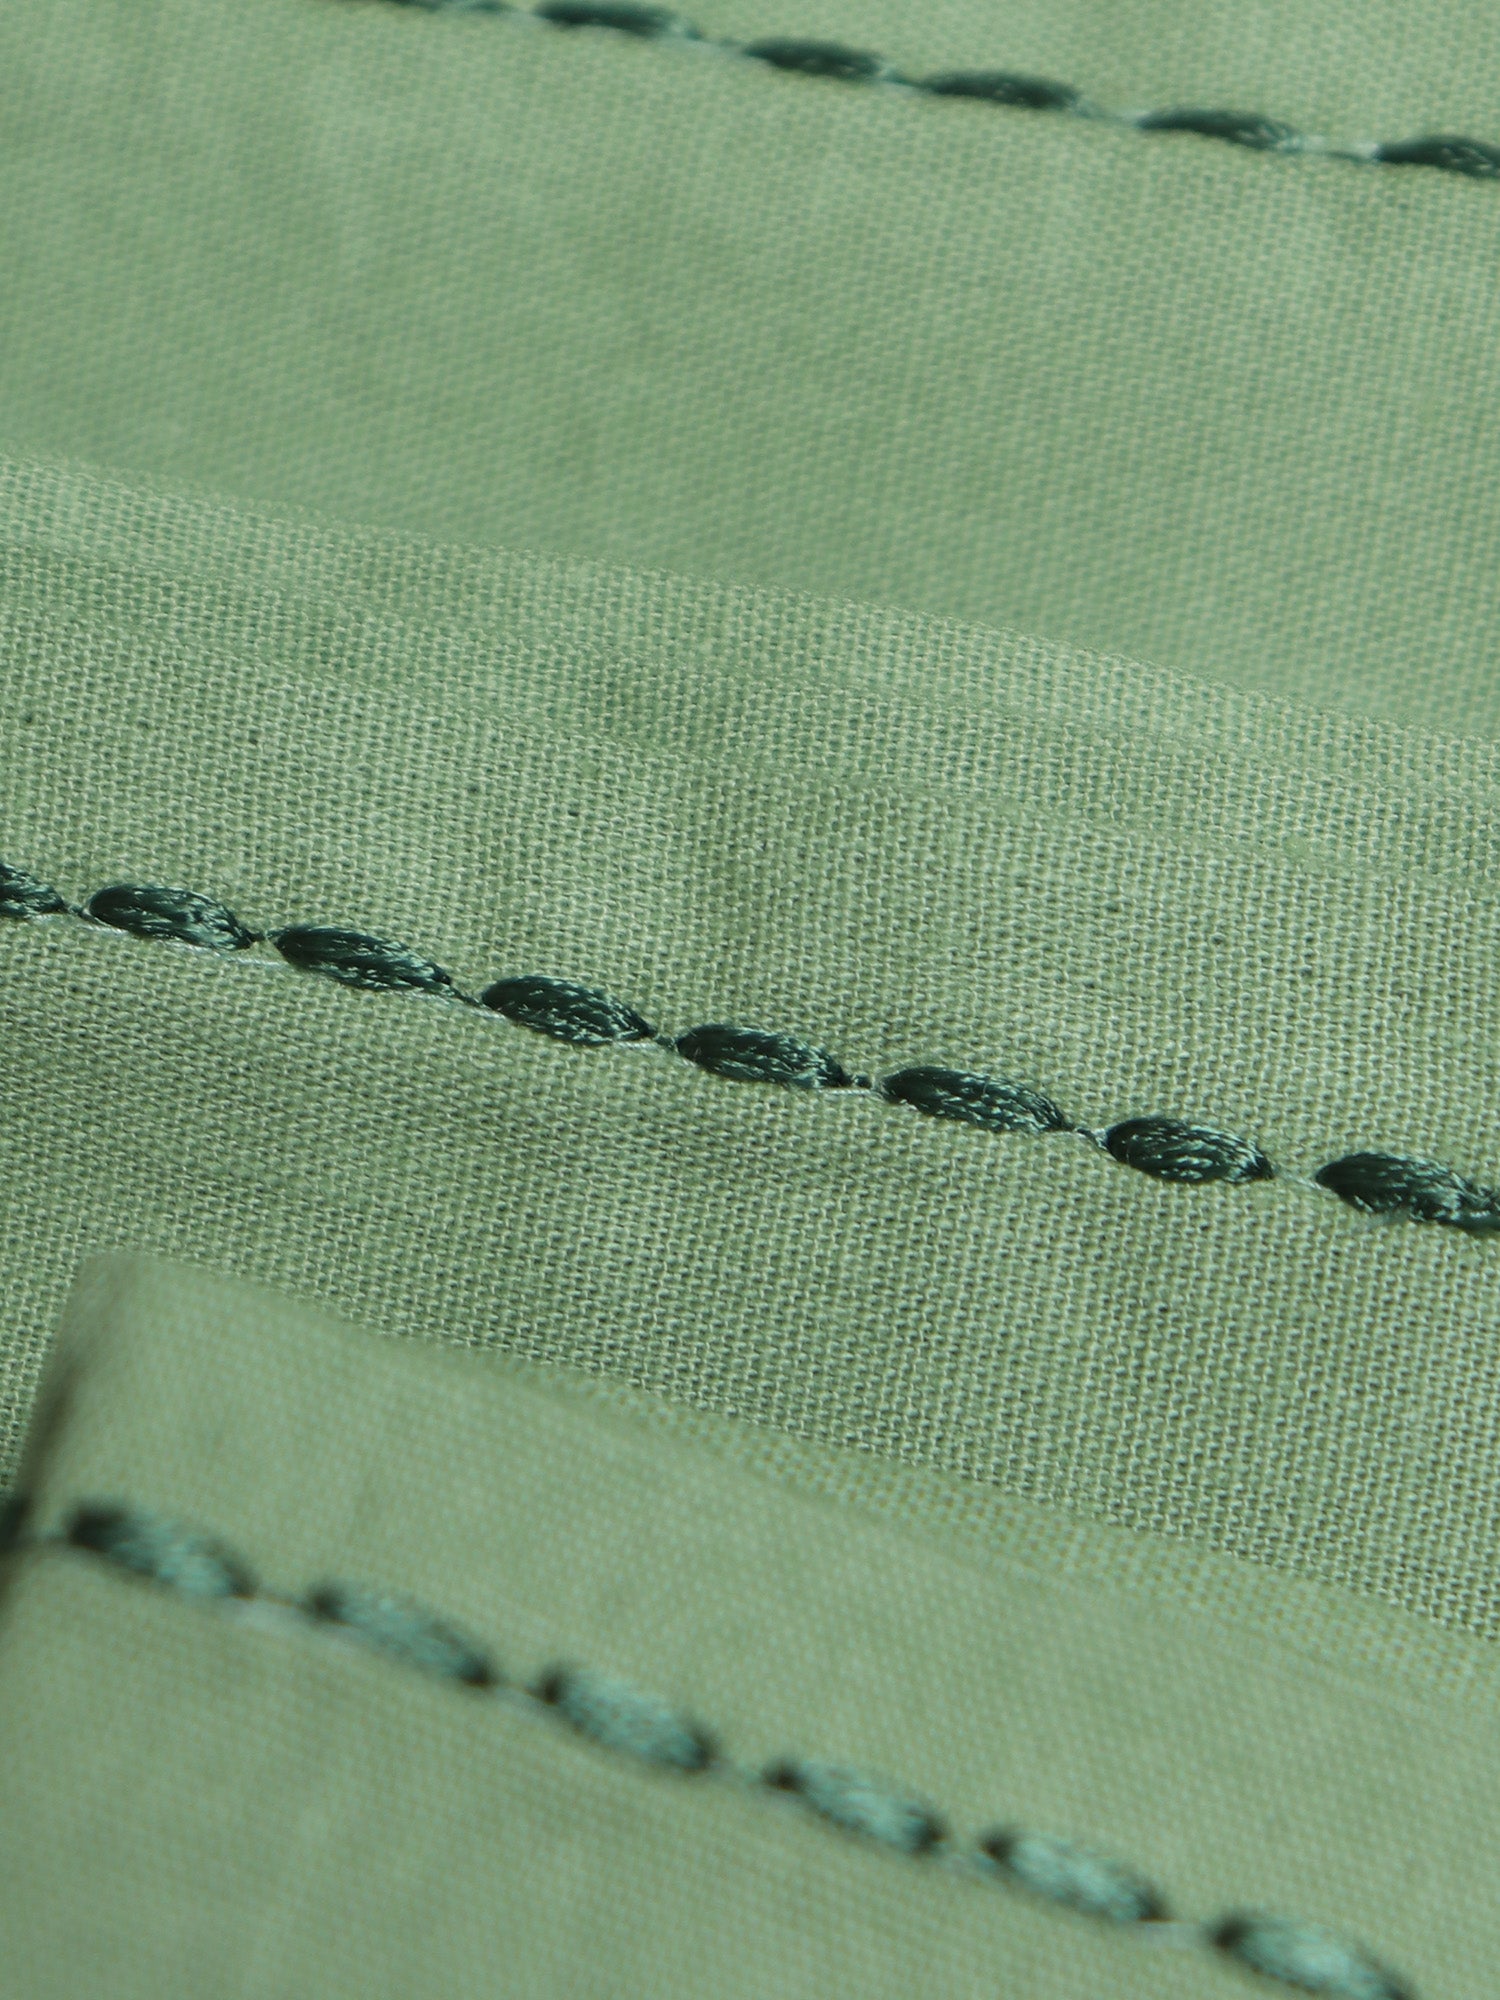 closeup of chawal taka hand embroidered set of 6 dinner napkins in olive green color - 16x16 inch